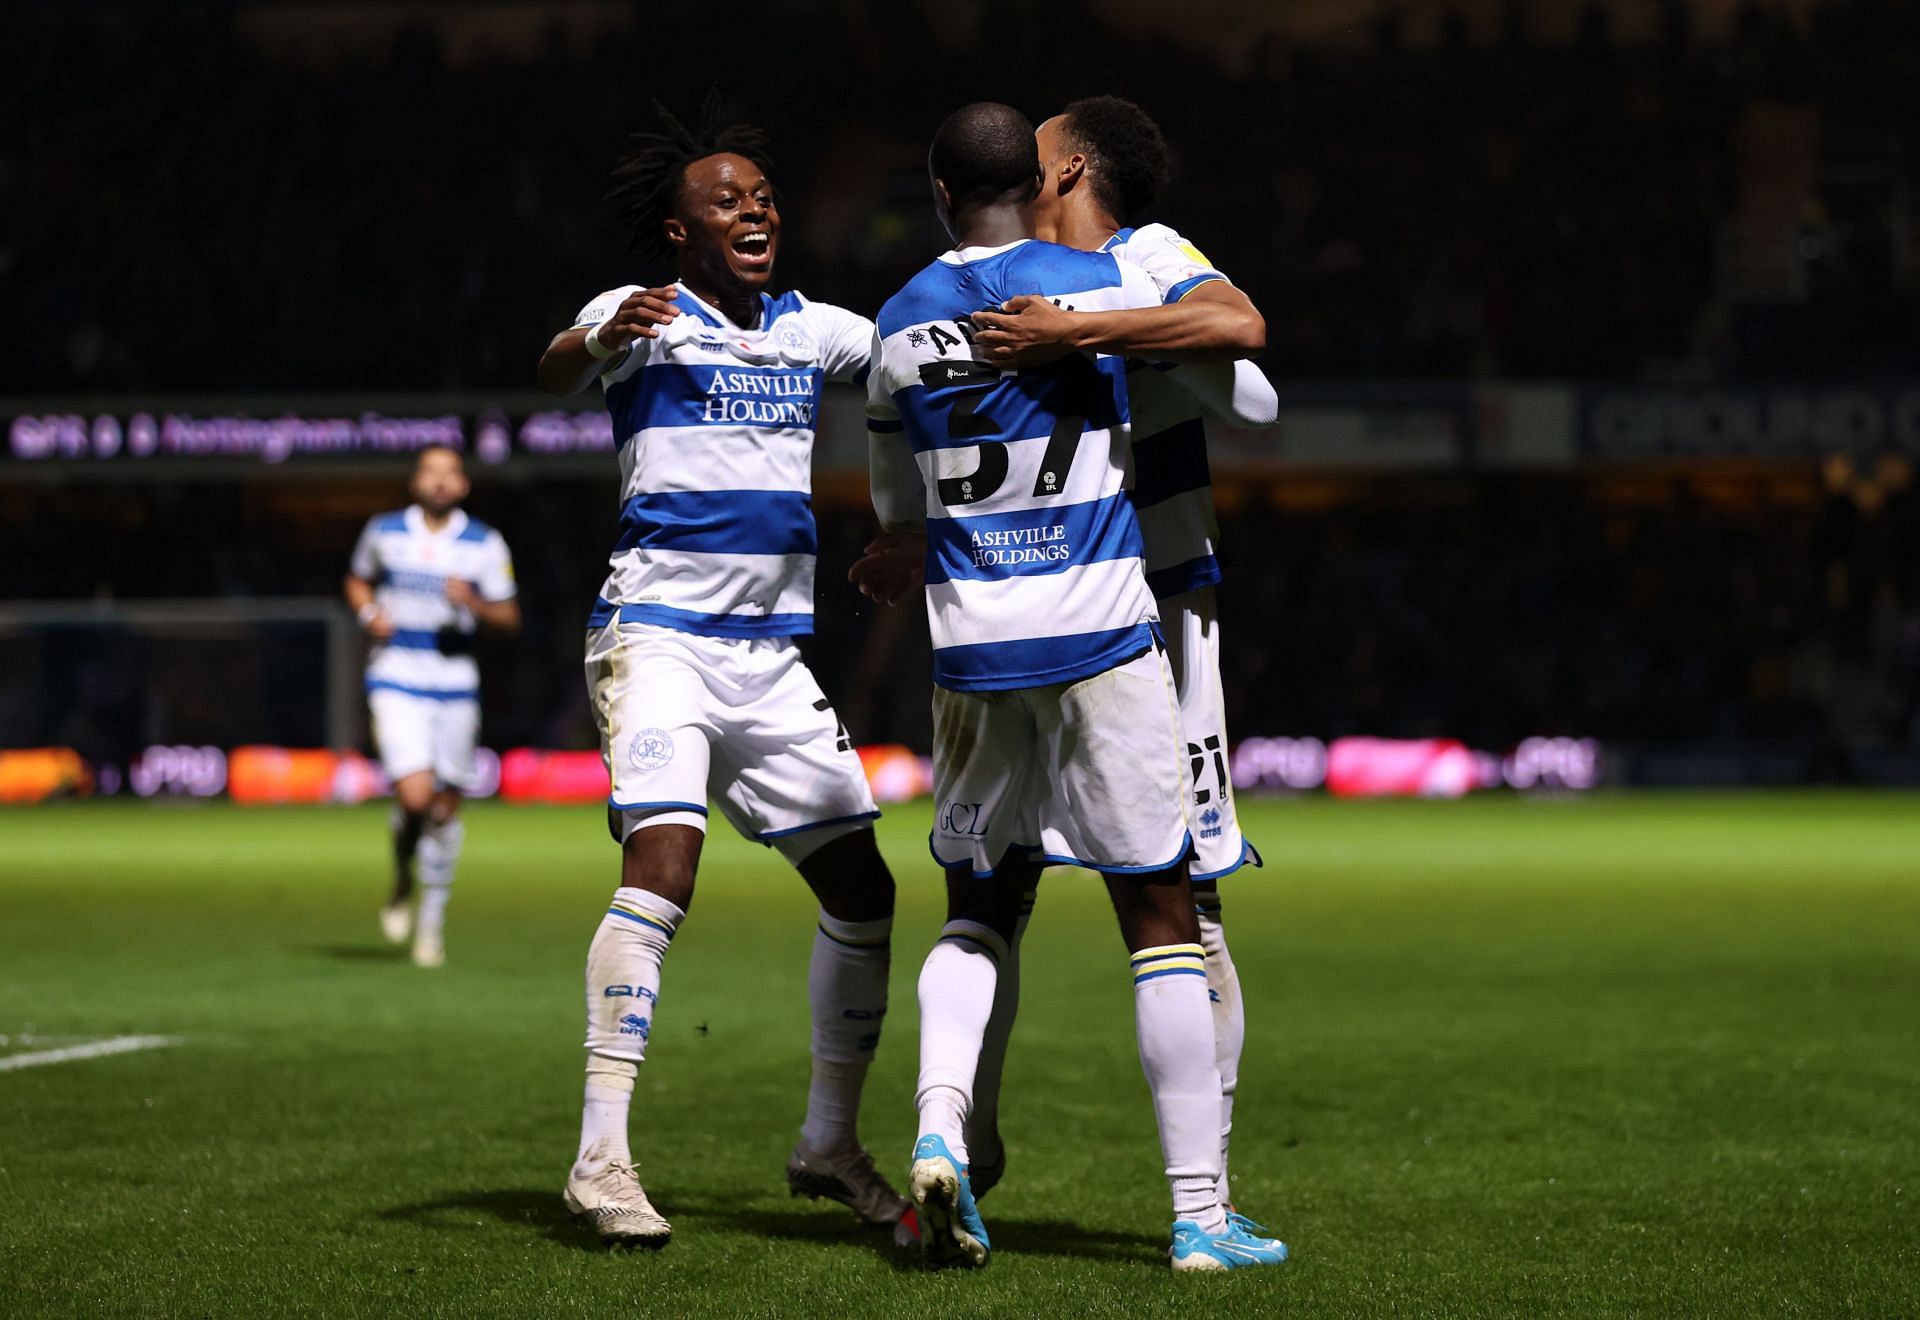 QPR vs Luton Town prediction, preview, team news and more | EFL Championship 2021-22